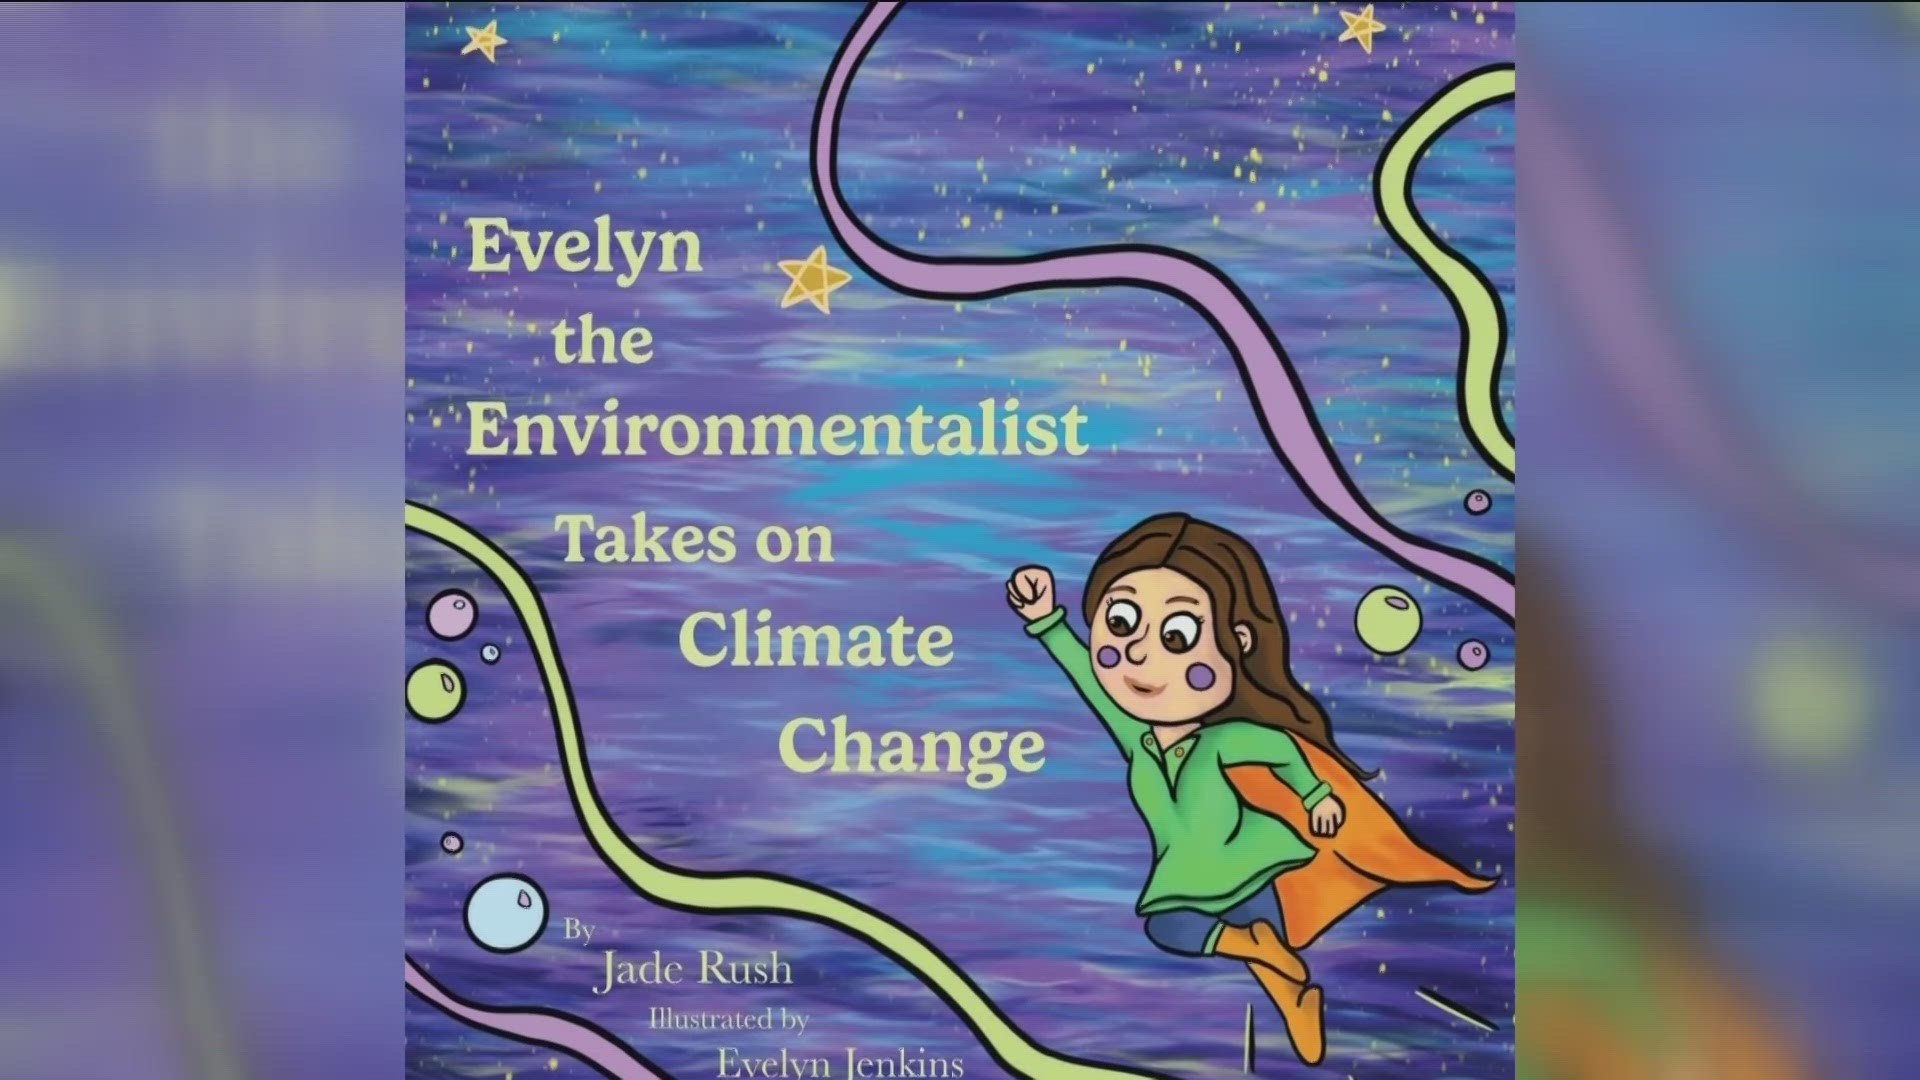 "Evelyn the Environmentalist Takes on Climate Change" helps children understand the important roles in helping the planet.